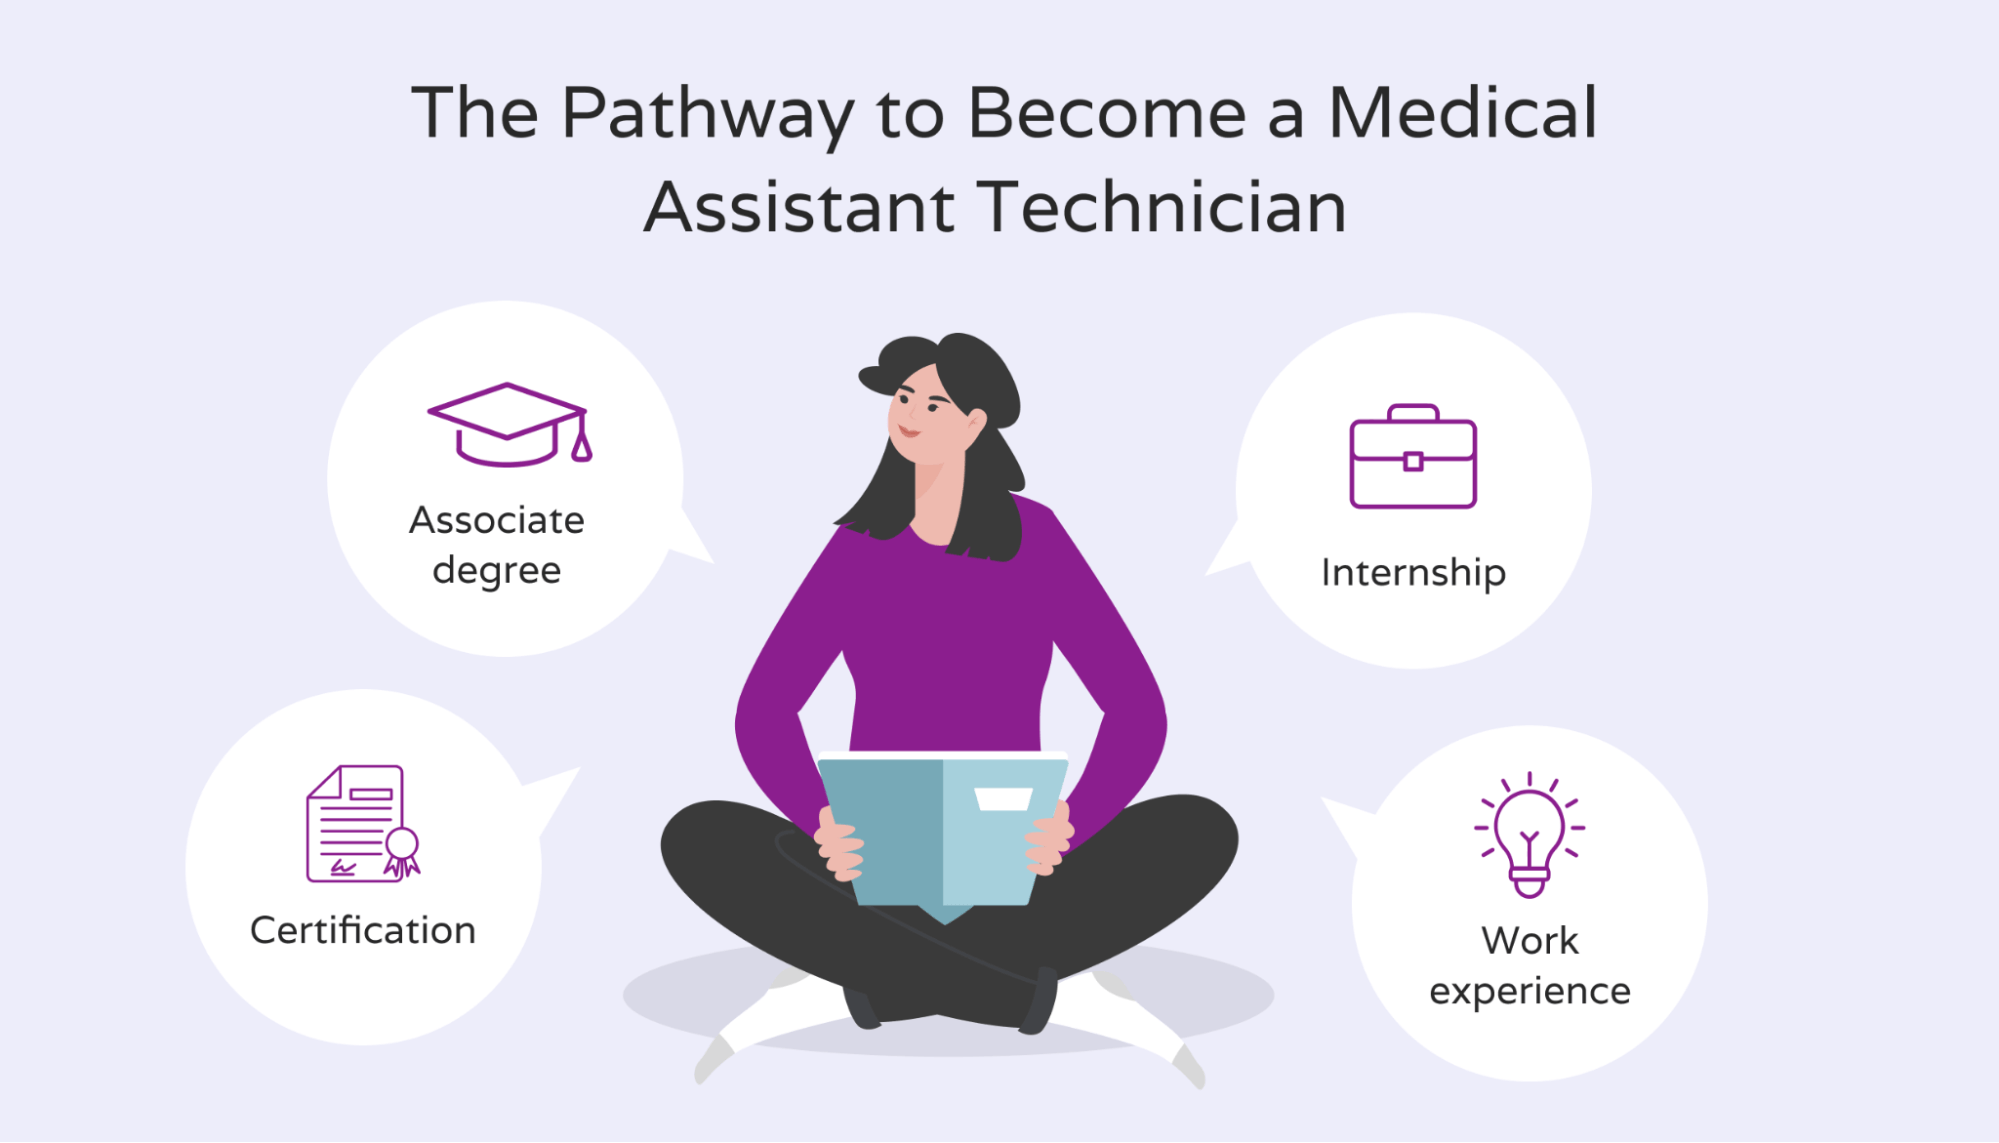 How to become a medical assistant technician